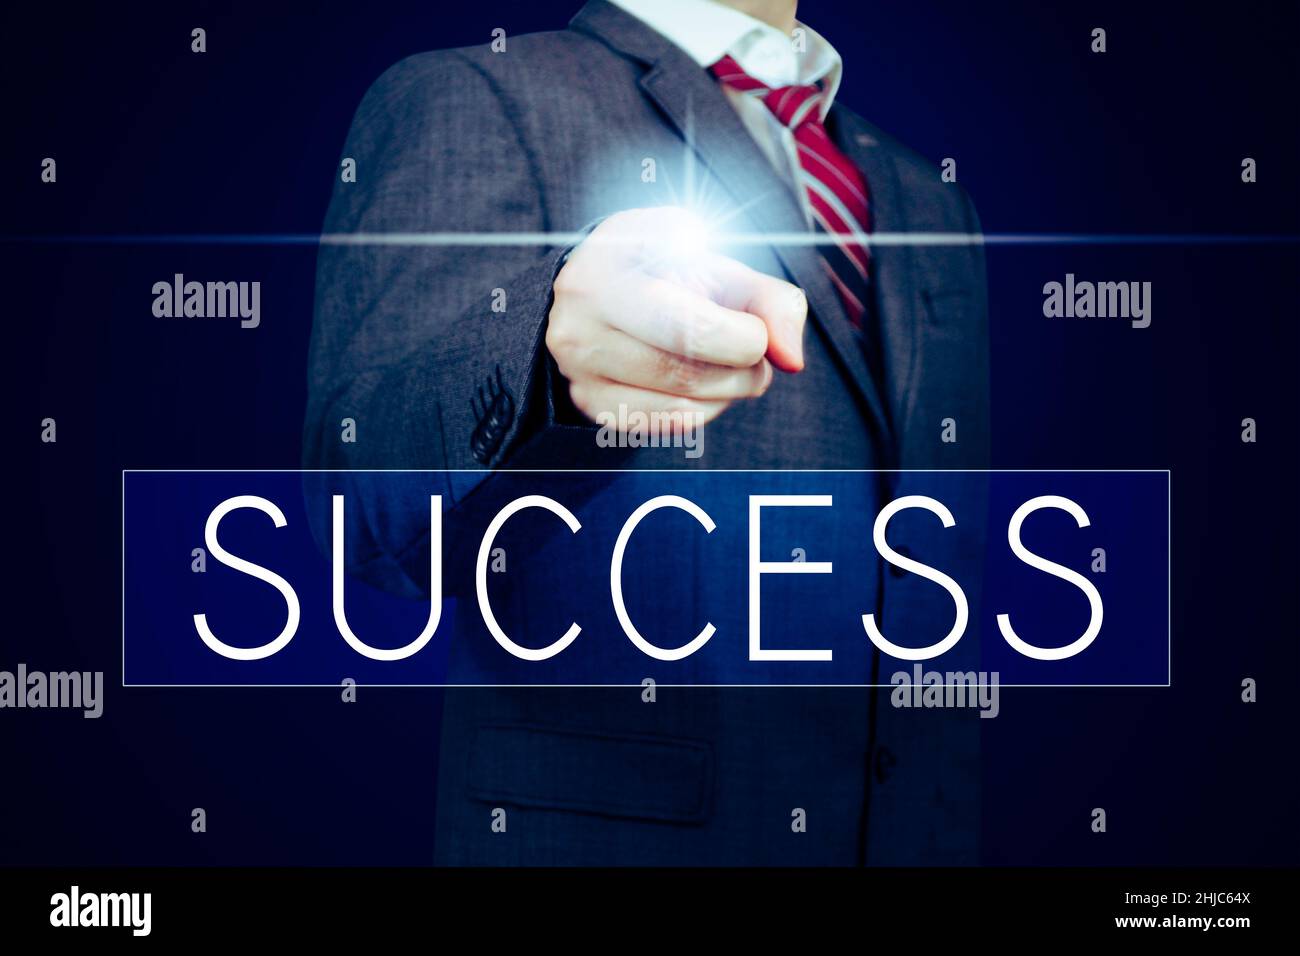 Success - lettering, businessman pointing finger Stock Photo